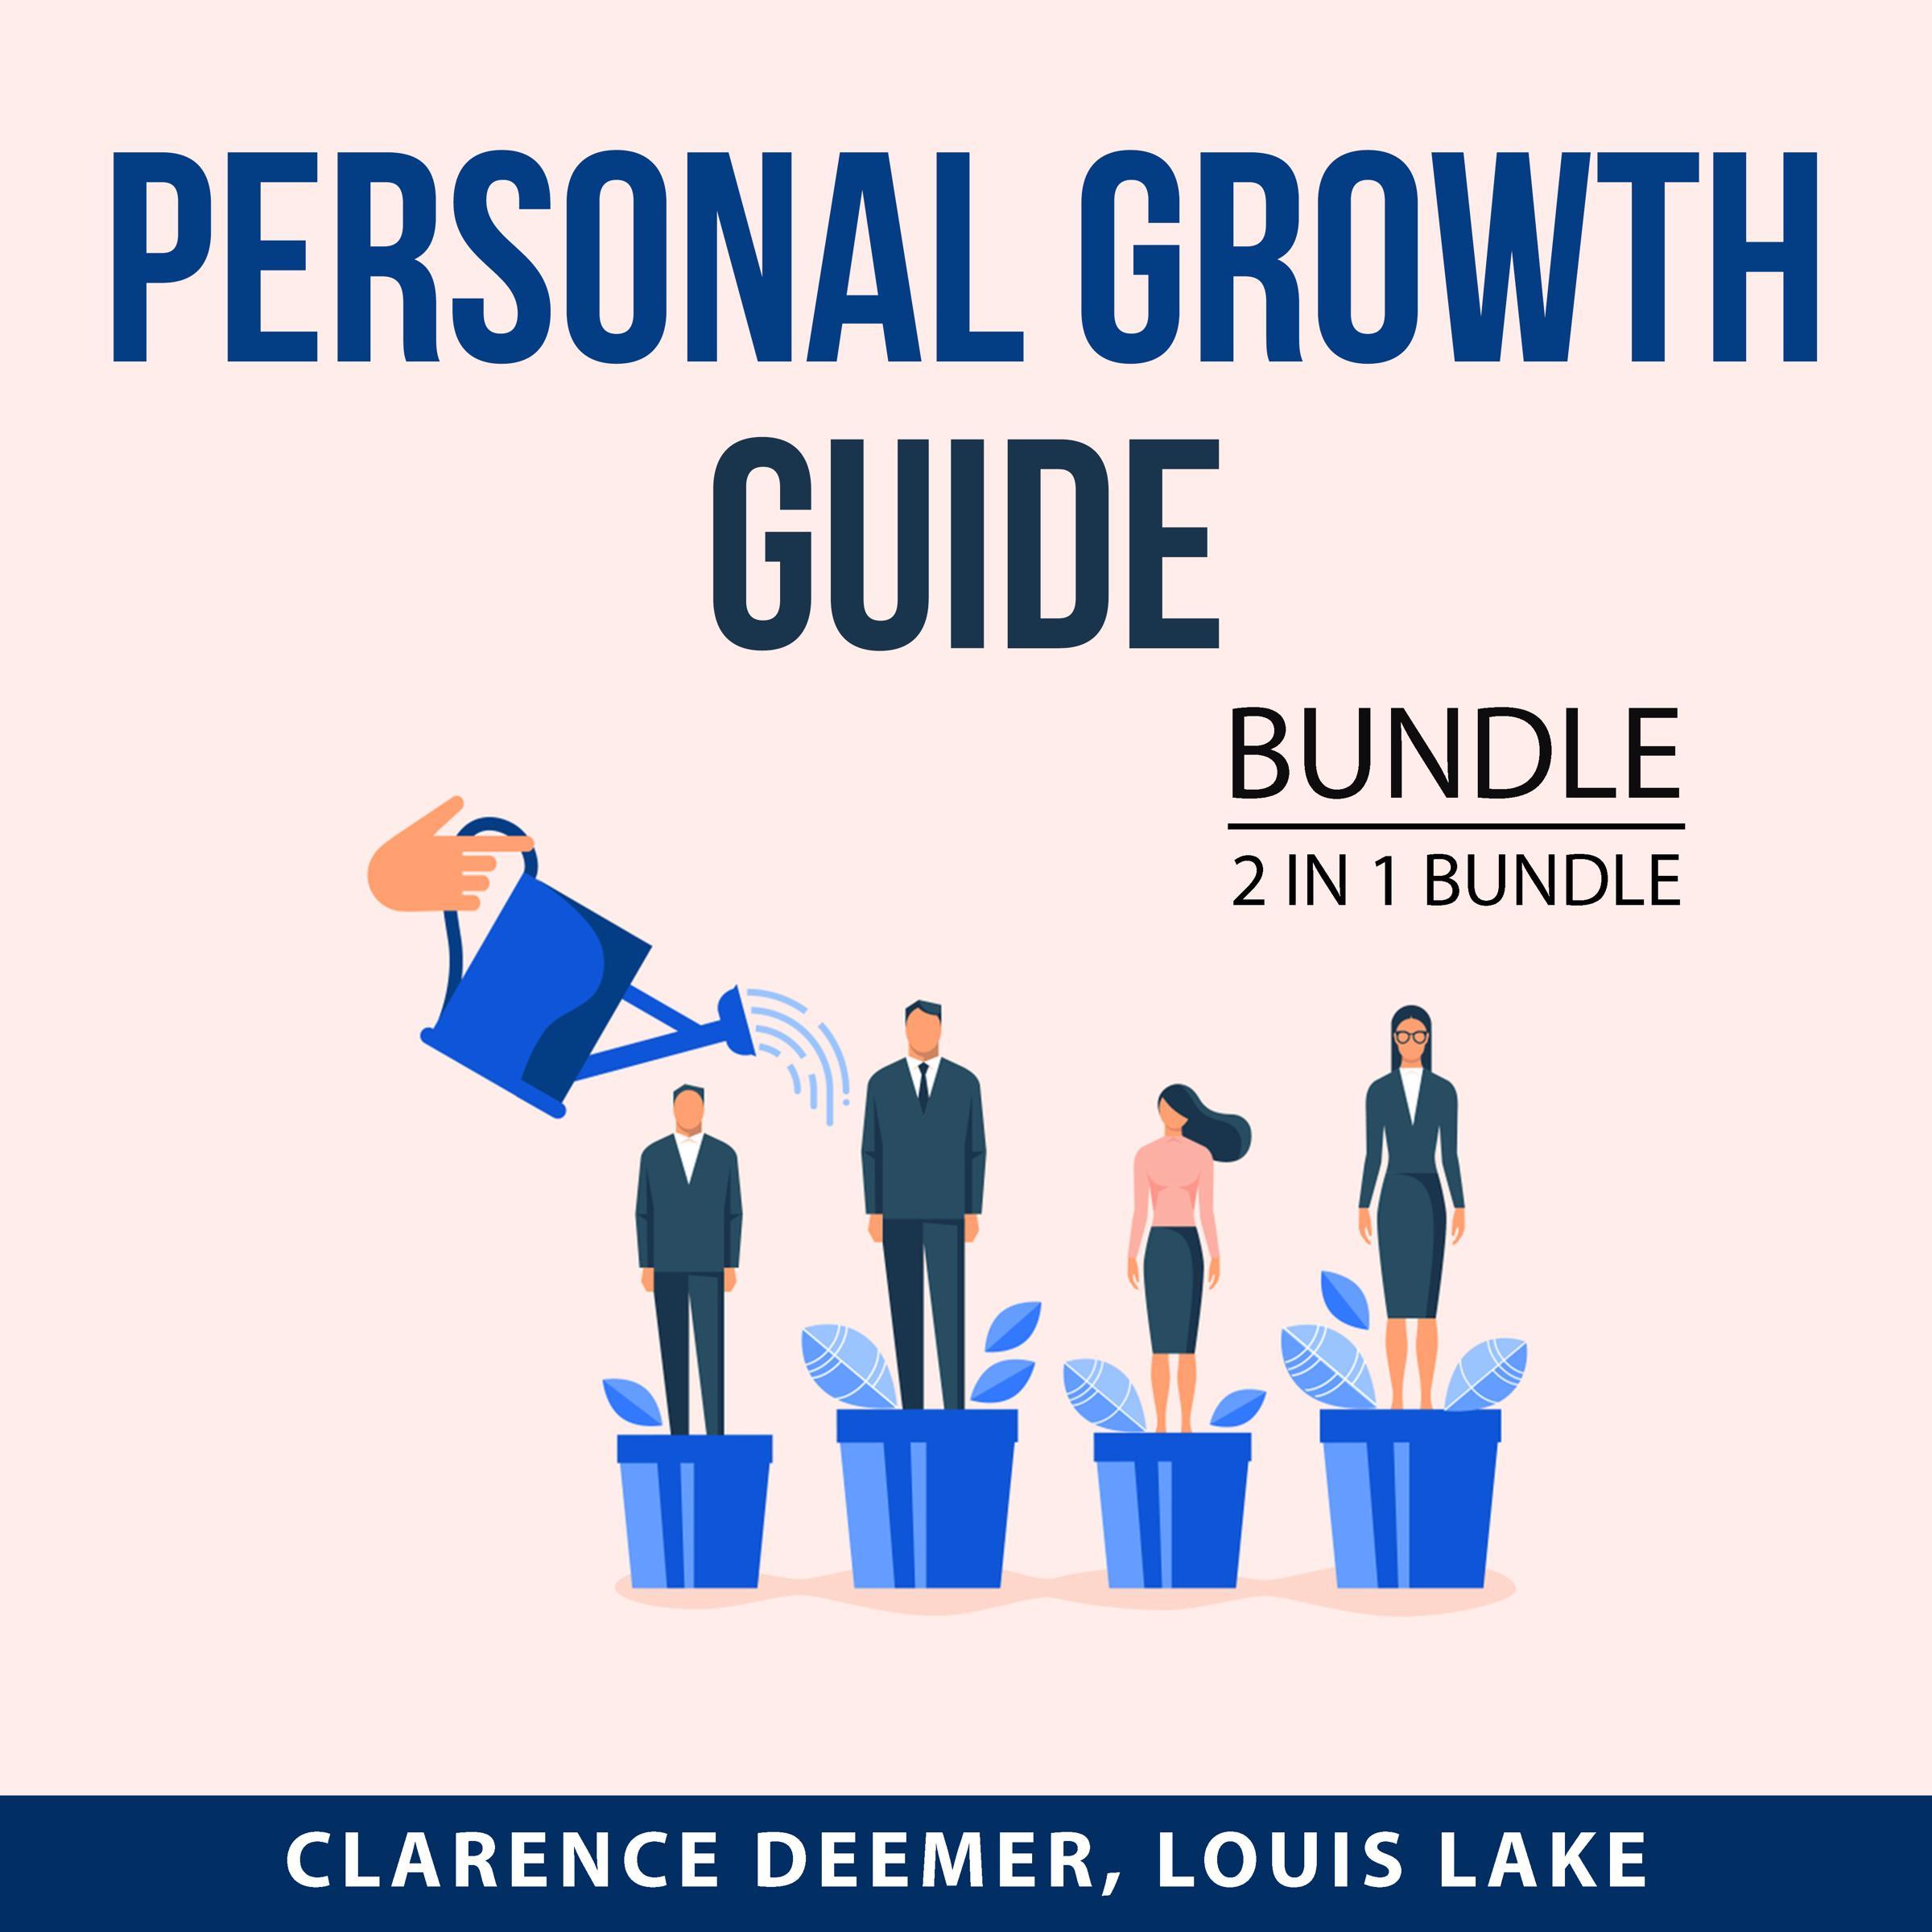 Personal Growth Guide Bundle, 2 in 1 bundle: Explosive Growth and Laws of Growth